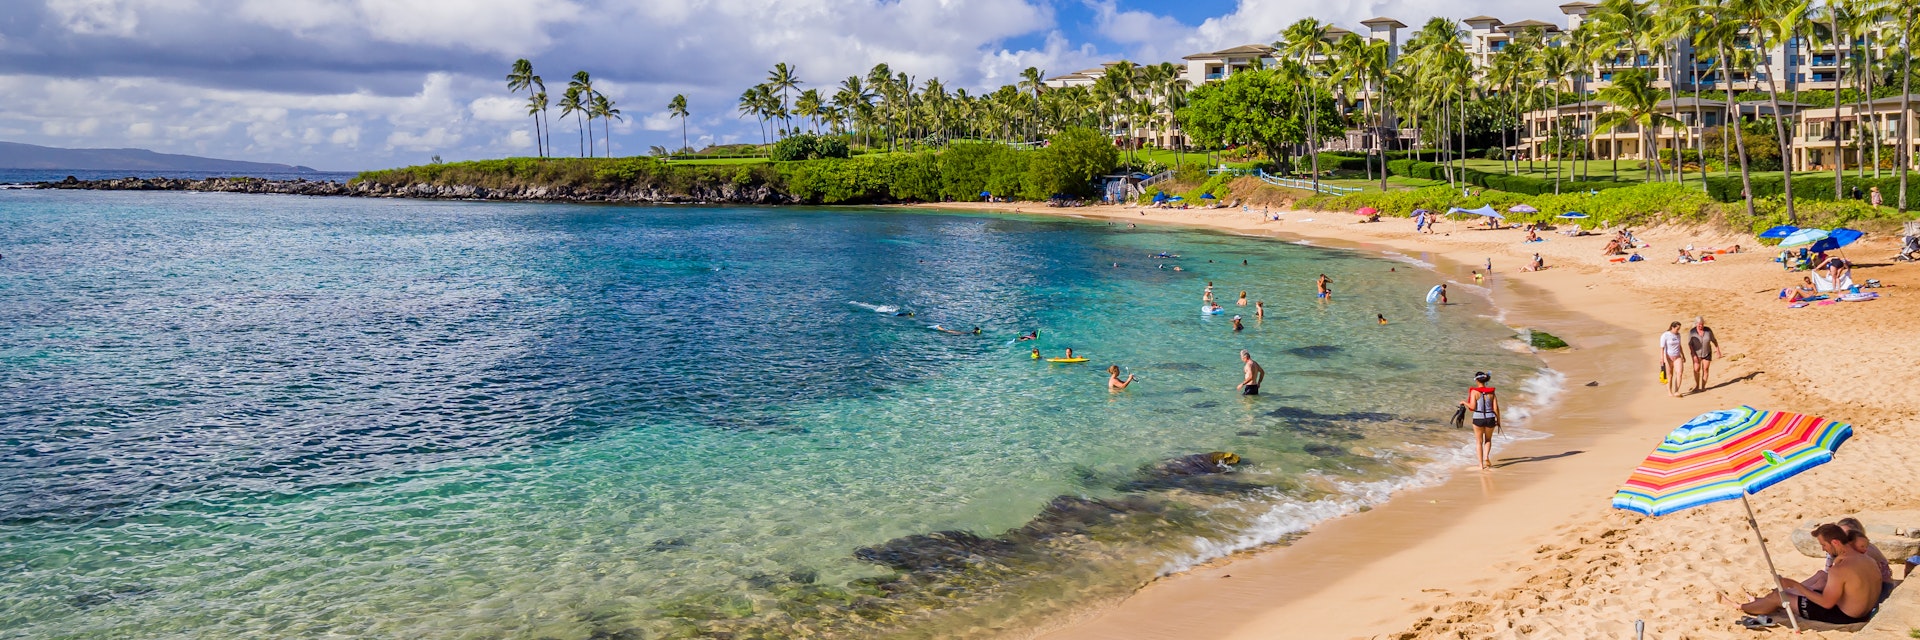 Kapalua beach bay, Maui, Hawaiian Islands - Aug 2019: Quiet, elegant, picturesque, Kapalua boasts beautiful seabed and ideal atmosphere for family vacation